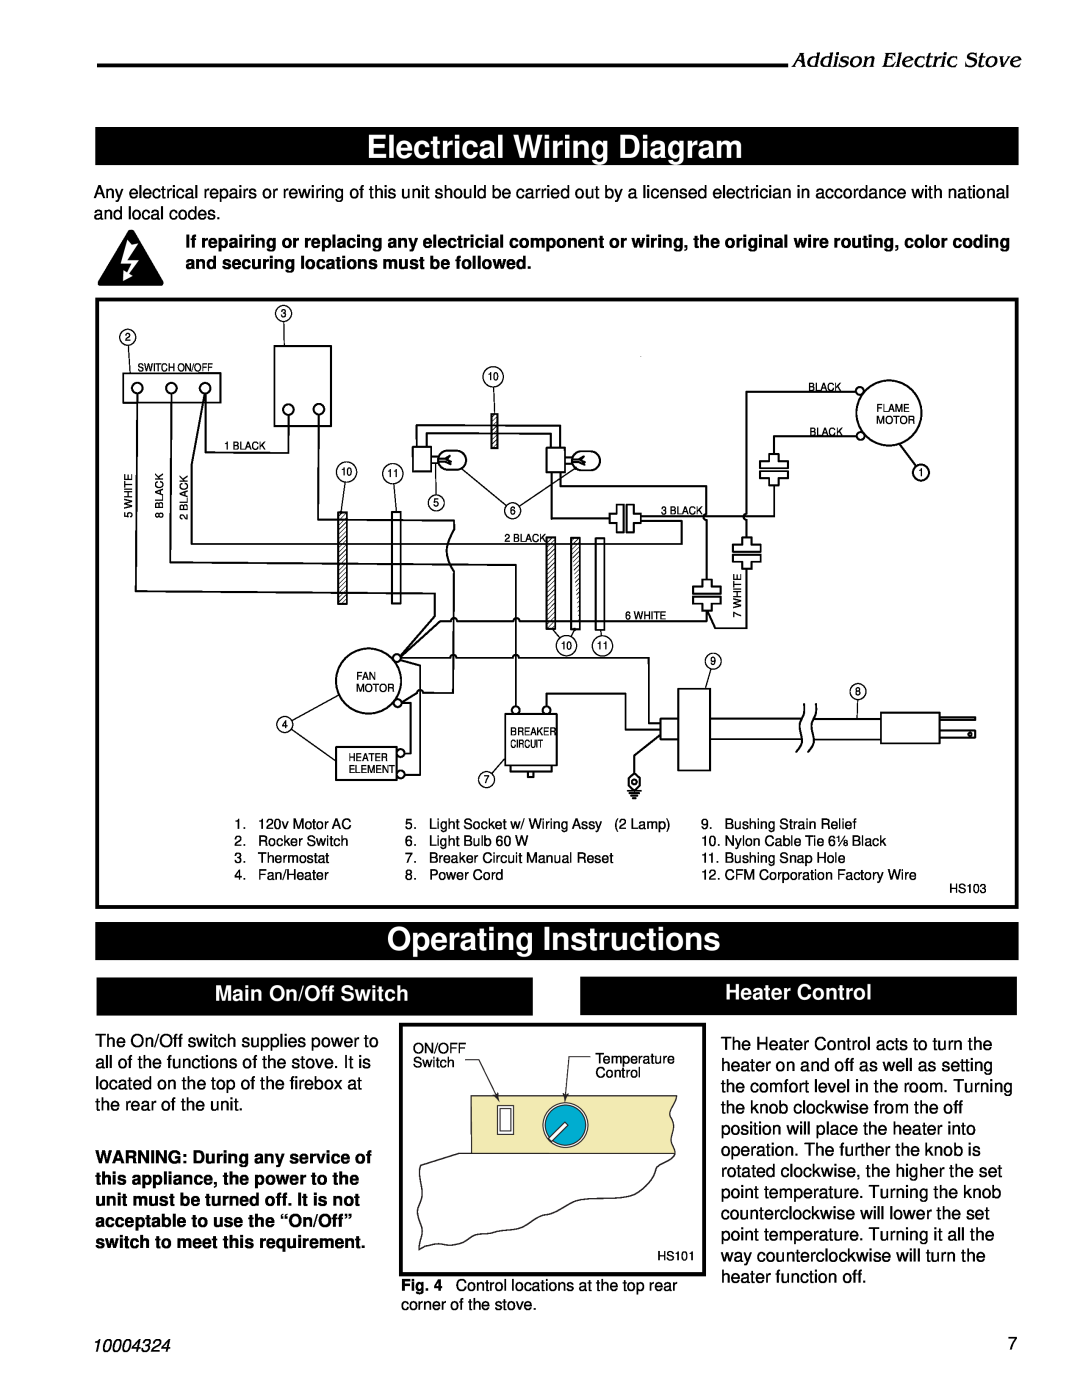 Vermont Casting ACSB Electrical Wiring Diagram, Operating Instructions, Main On/Off Switch, Heater Control, 10004324 